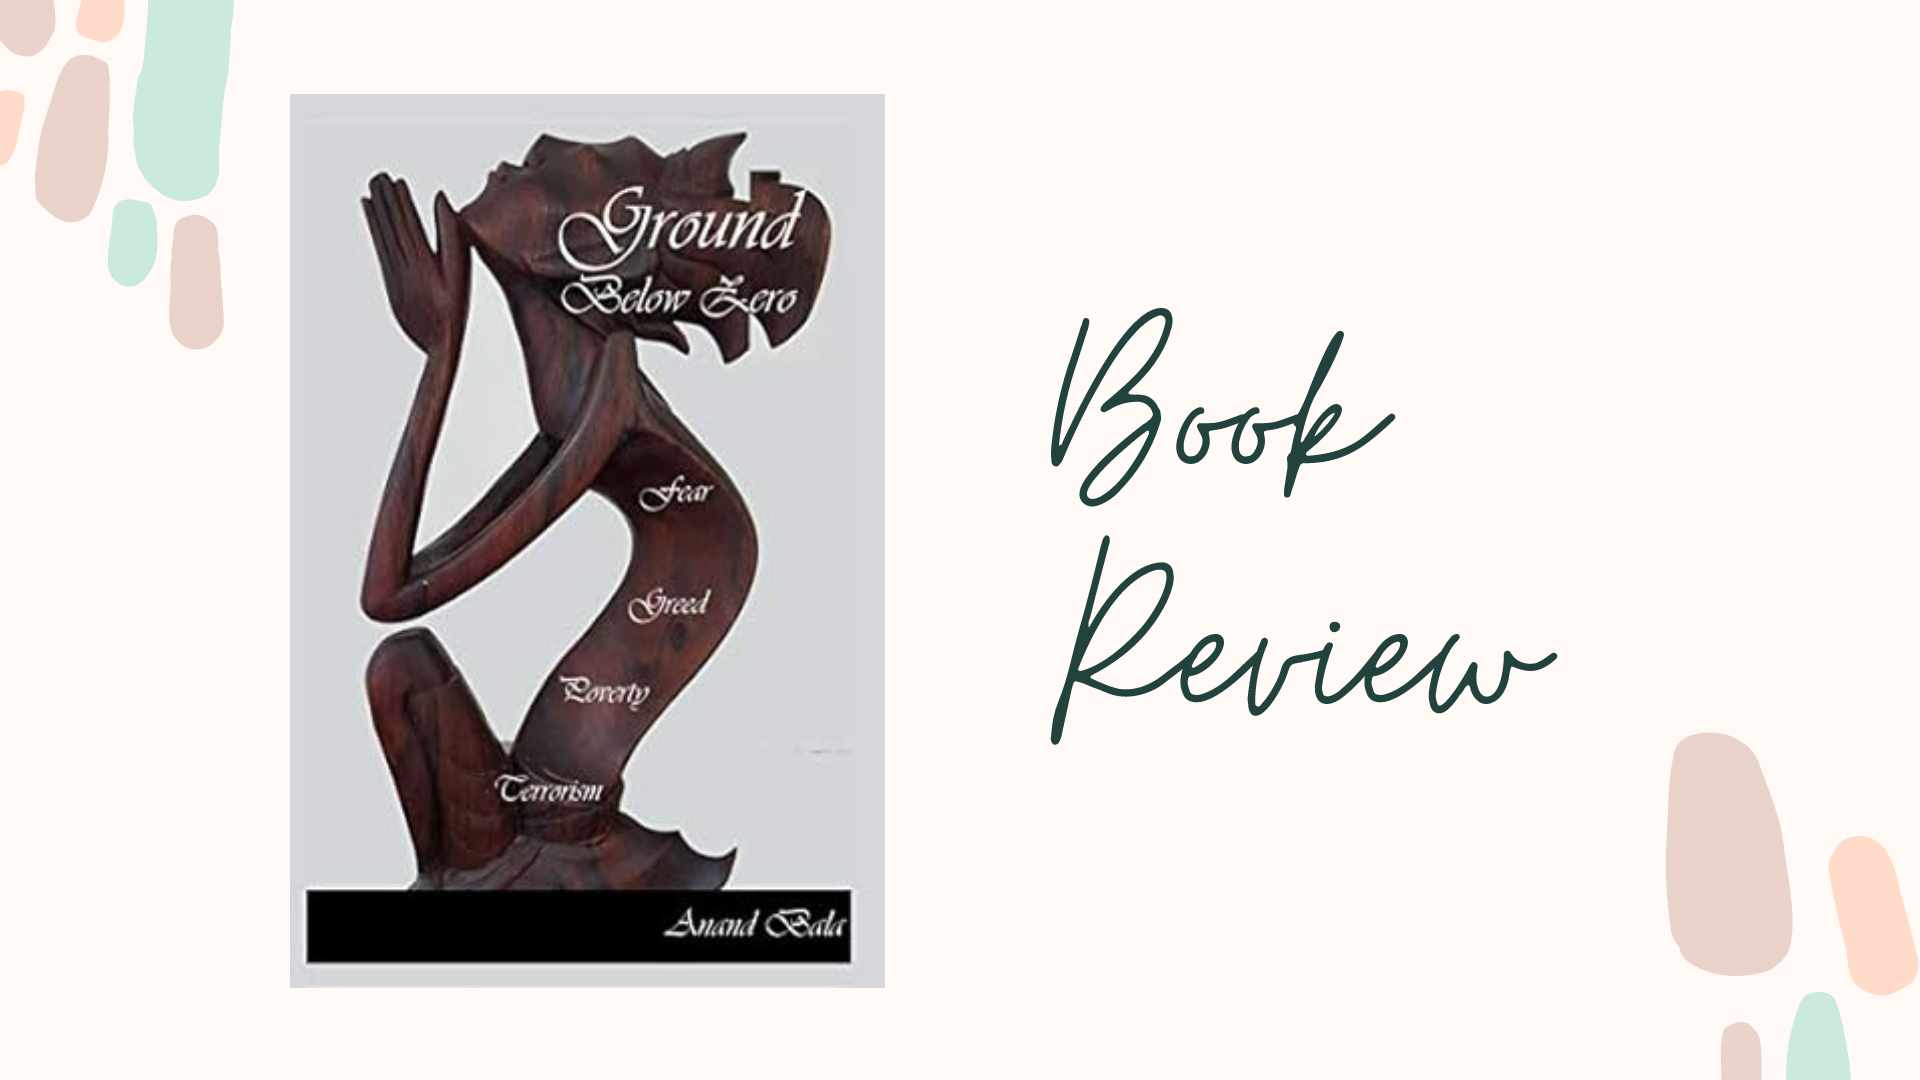 Book Review: Ground Below Zero by Anand Bala